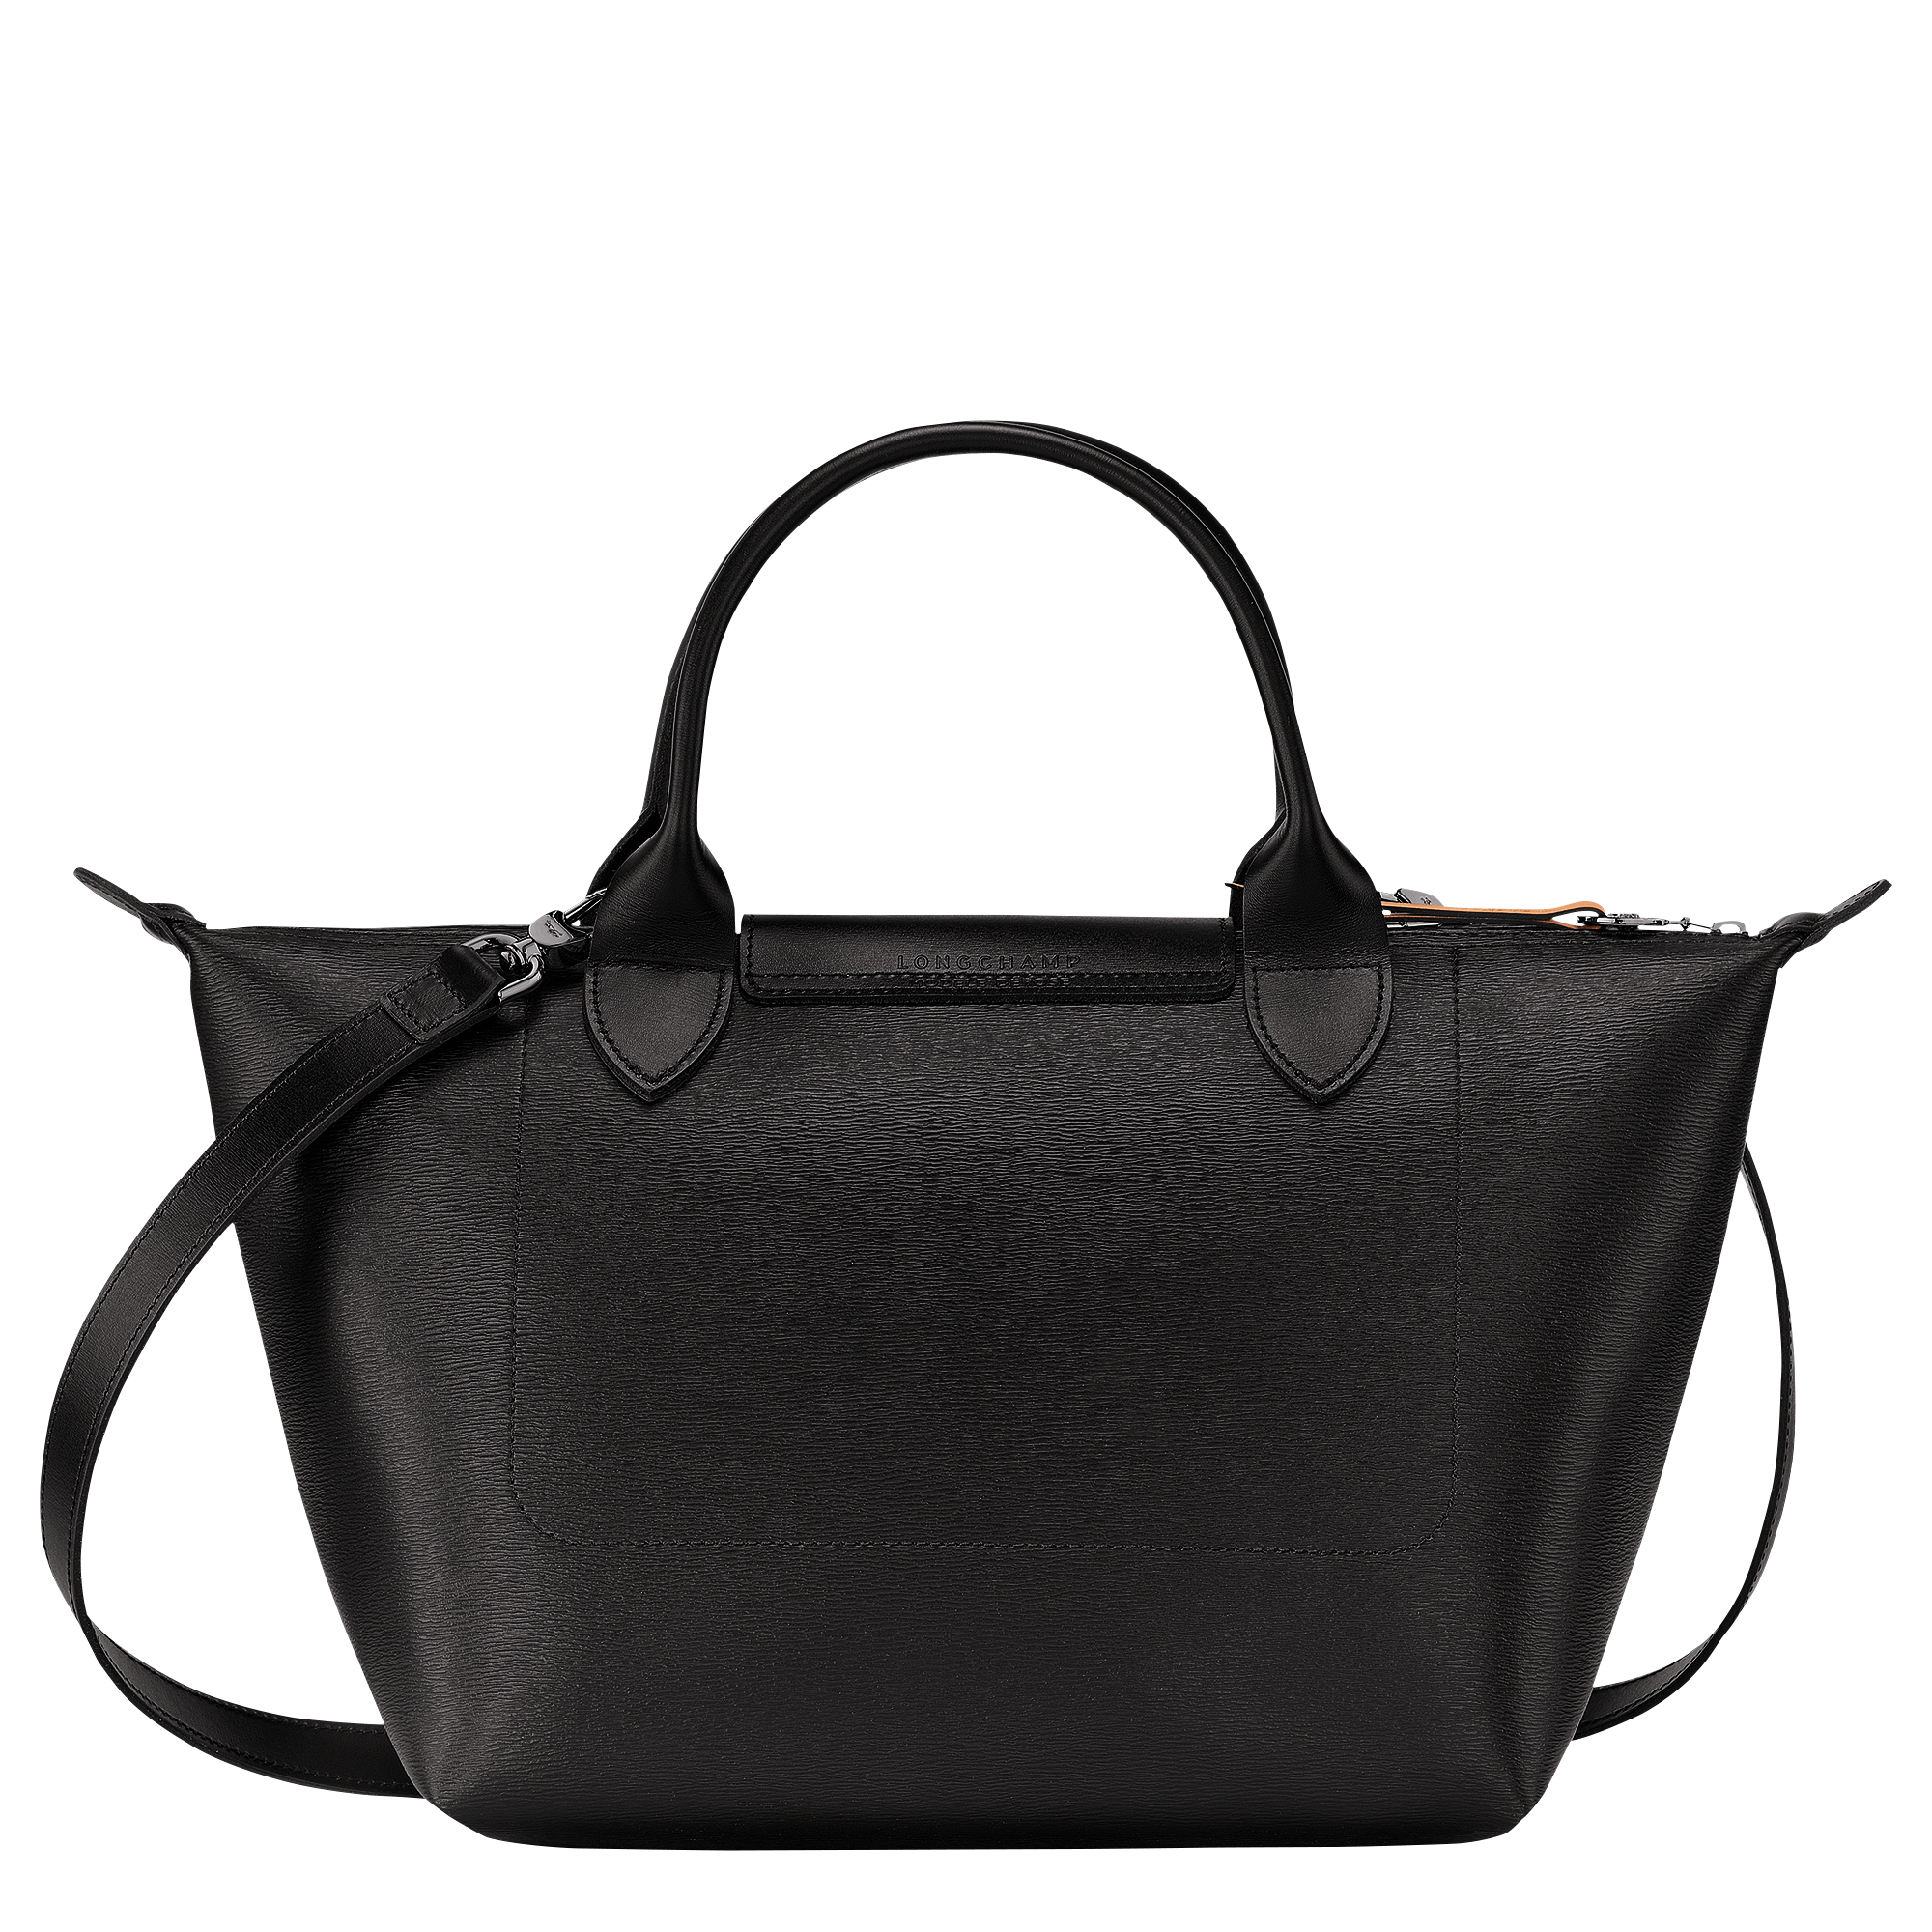 Black Leather Crossbody Tote with Black Handles